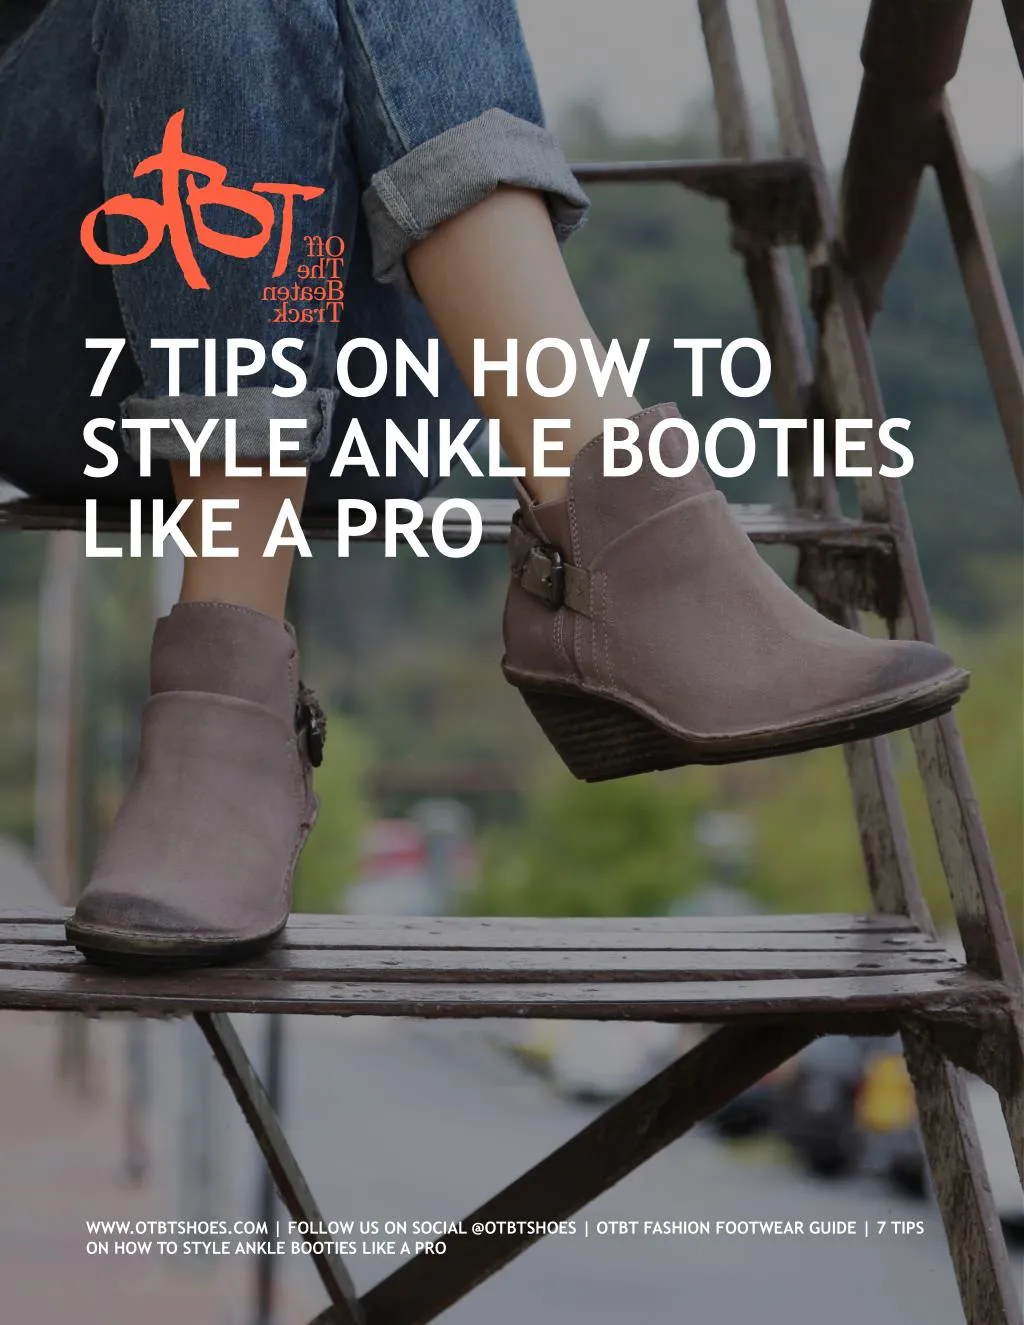 7 tips on how to style ankle booties like a pro